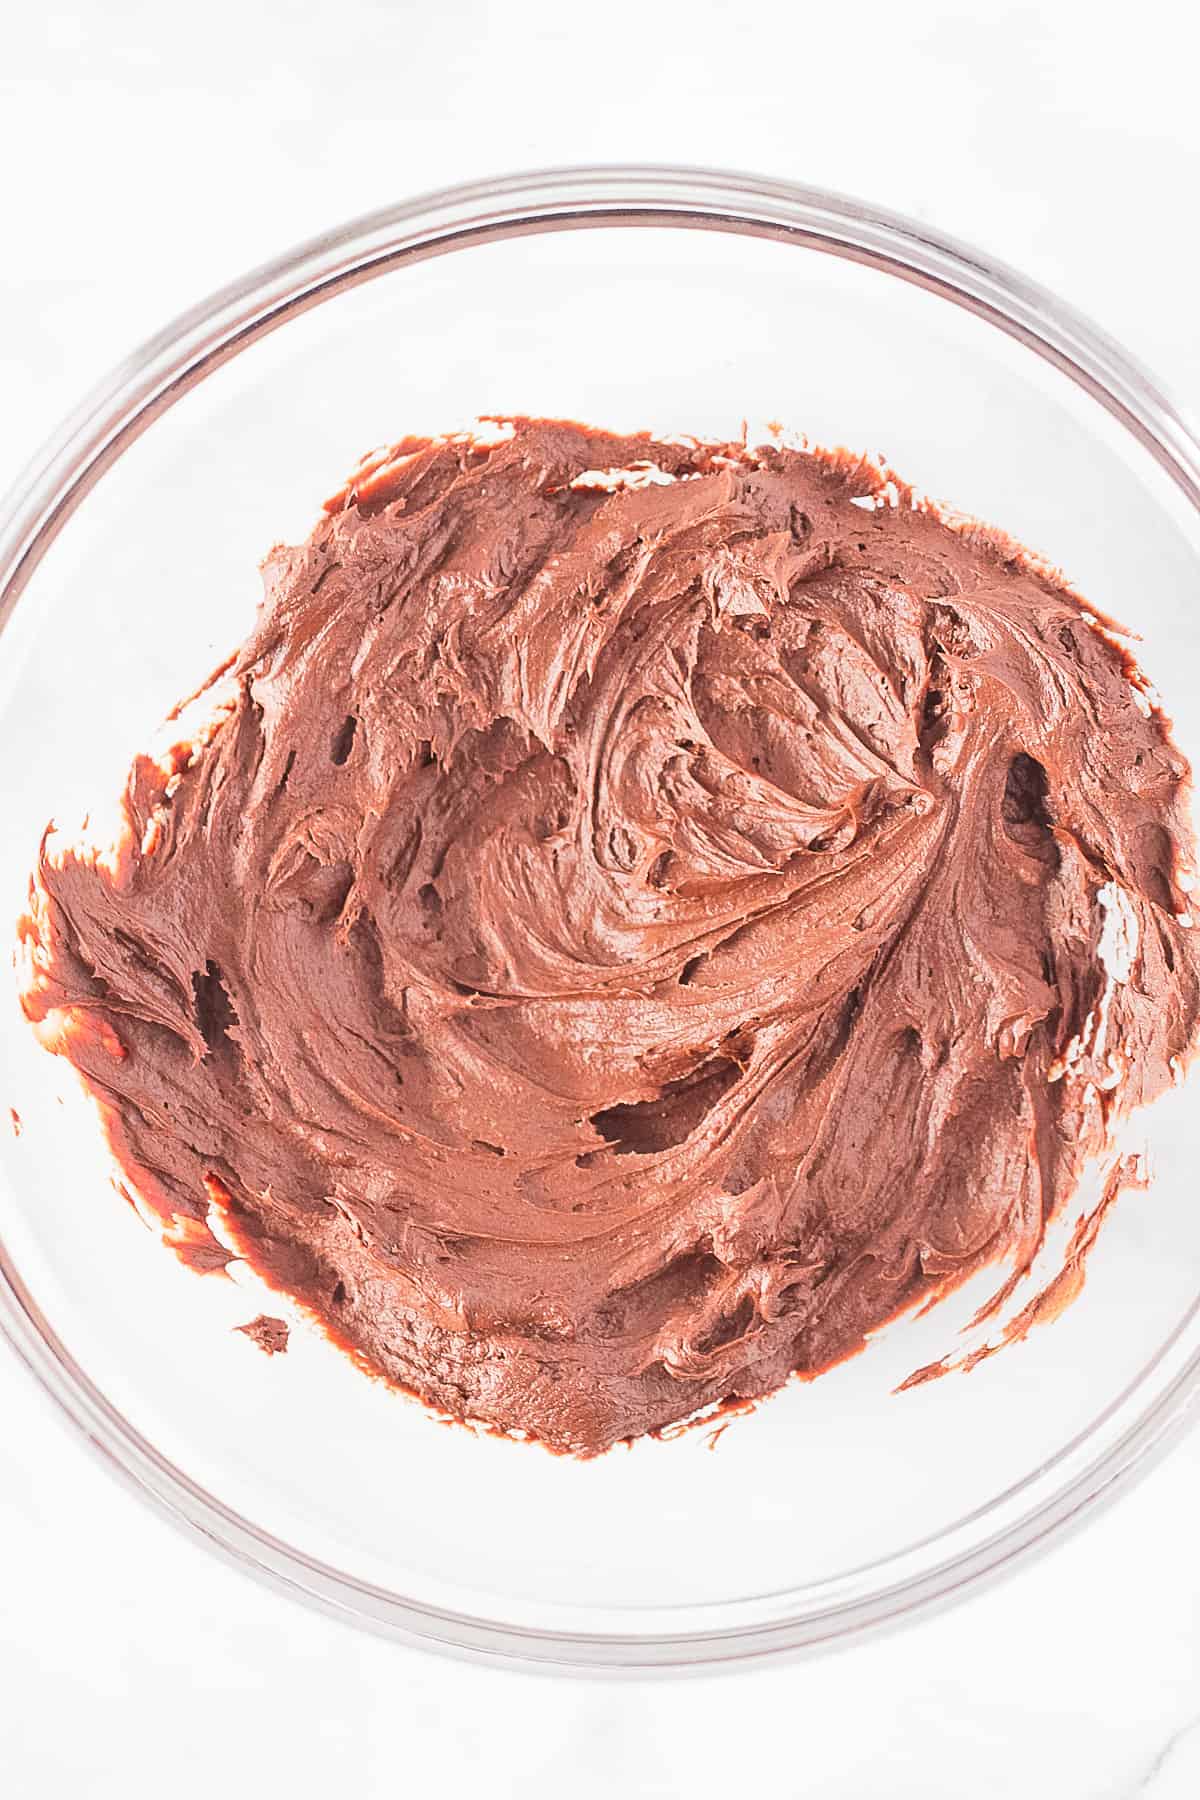 Vegan Chocolate Frosting in a glass bowl.